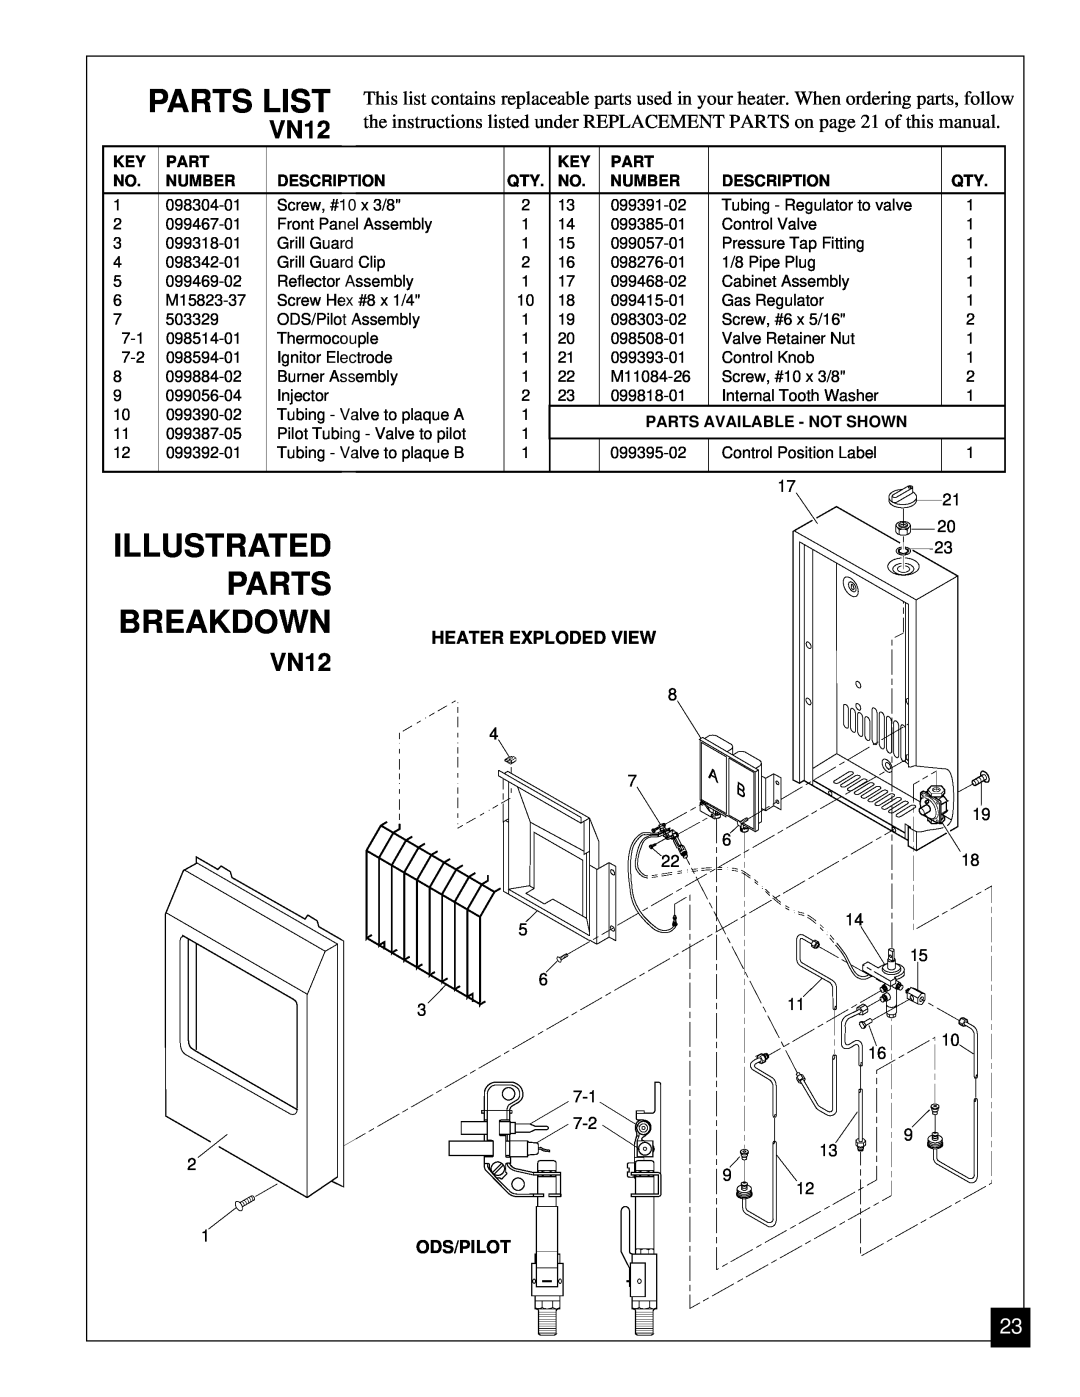 Vanguard Heating VN12, VN6A installation manual Illustrated Parts Breakdown, Parts List 